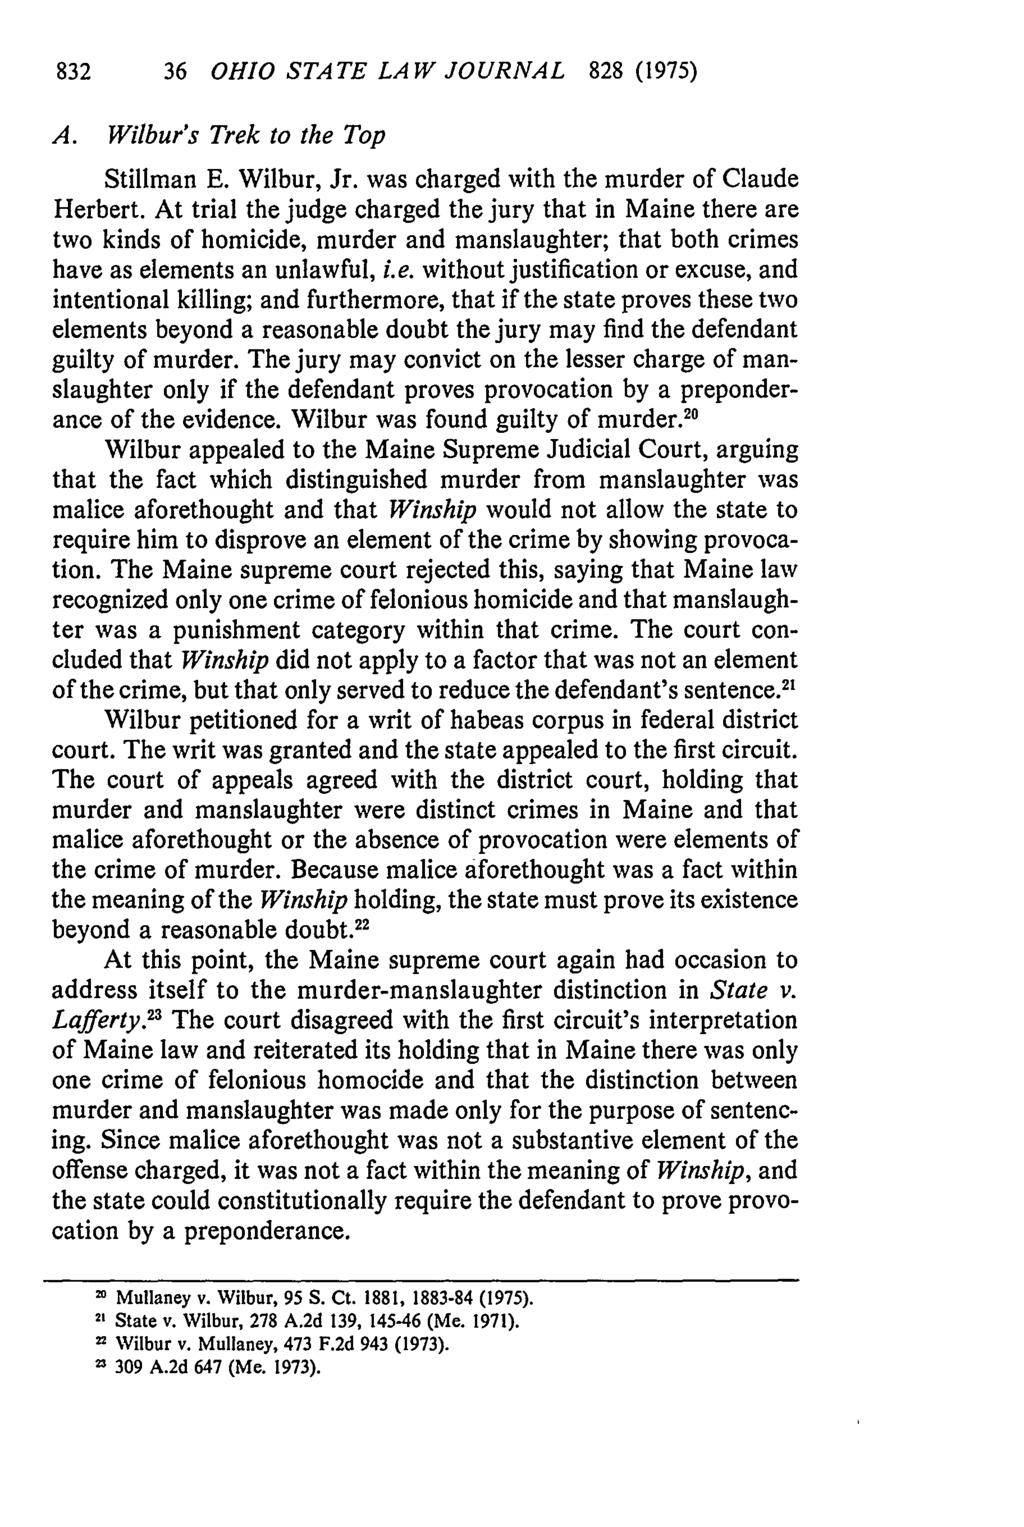 36 OHIO STATE LAW JOURNAL 828(1975) A. Wilbur's Trek to the Top Stillman E. Wilbur, Jr. was charged with the murder of Claude Herbert.